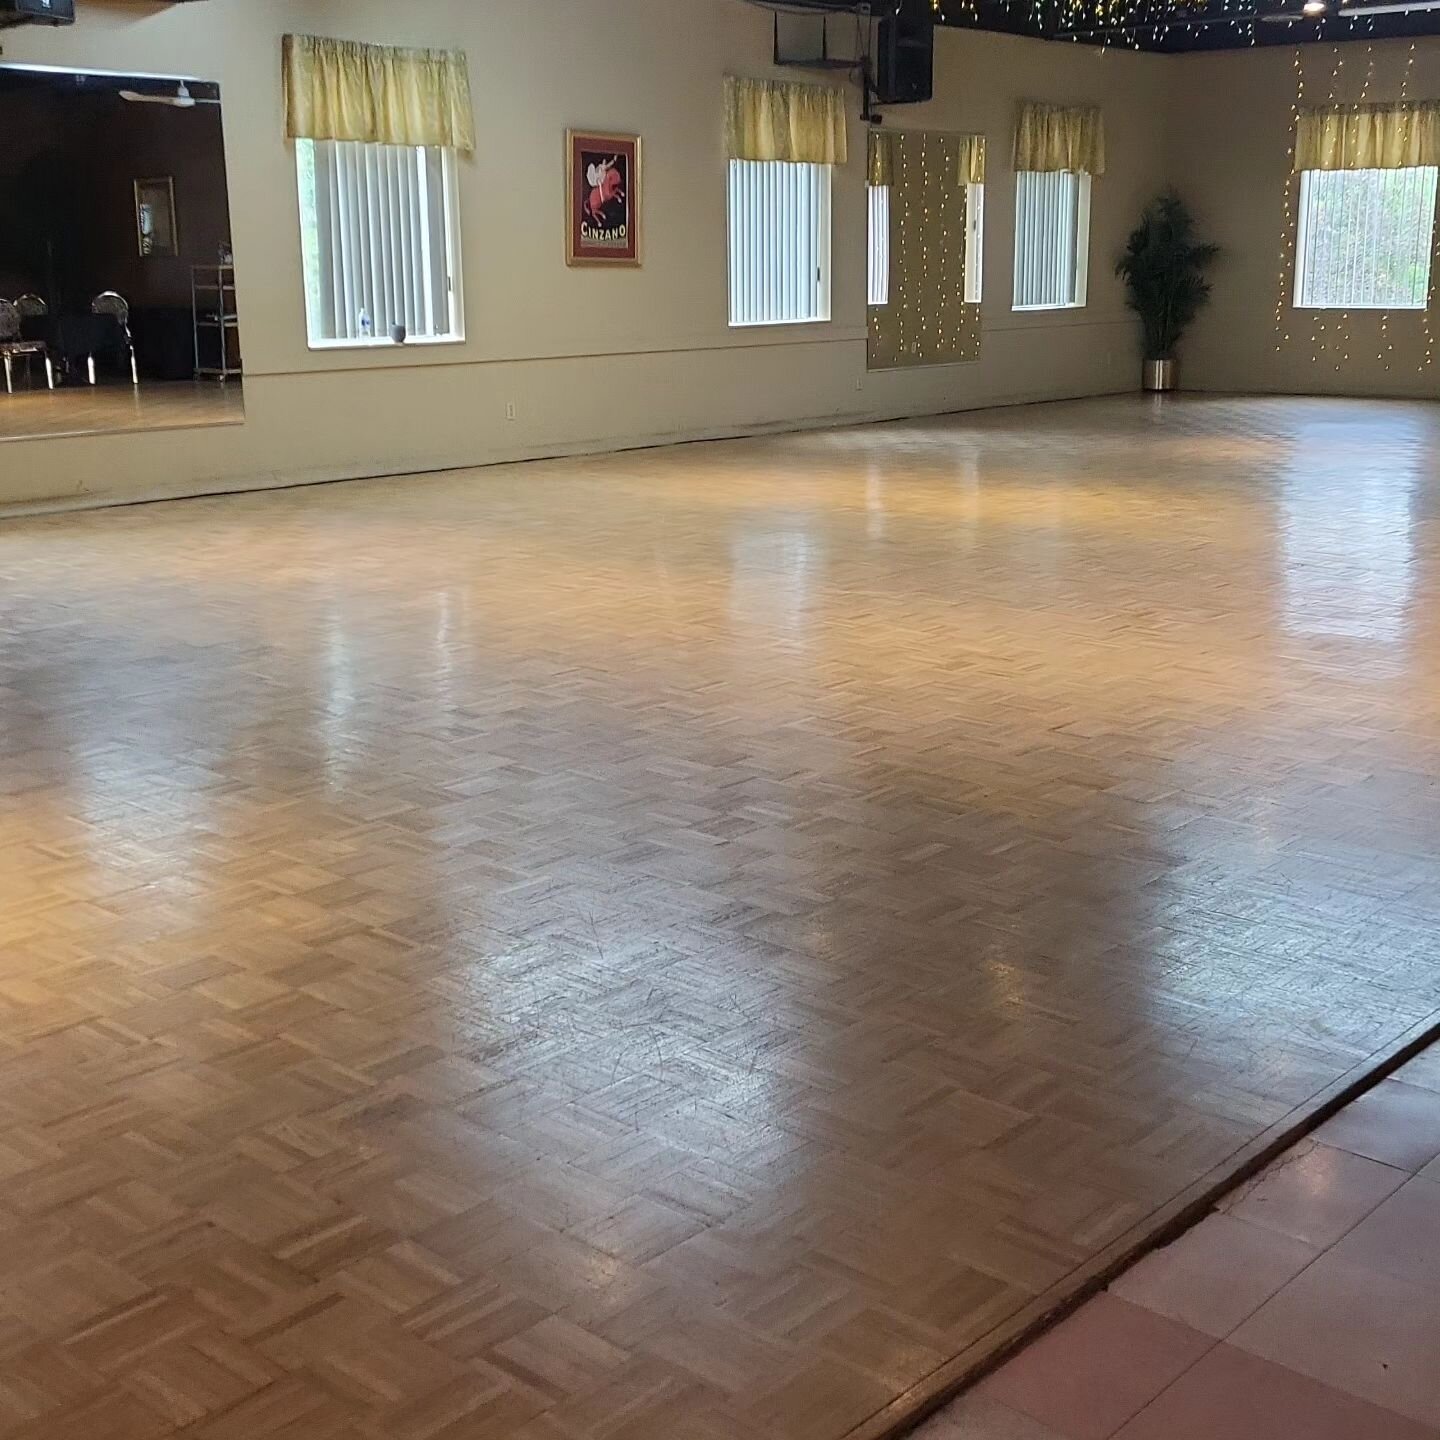 IF THIS DANCE FLOOR COULD TALK.... it would be saying &quot;come dance on me&quot;

Join myself and Remy for a fabulous cha cha class at 7:15 and dancing until 10pm!